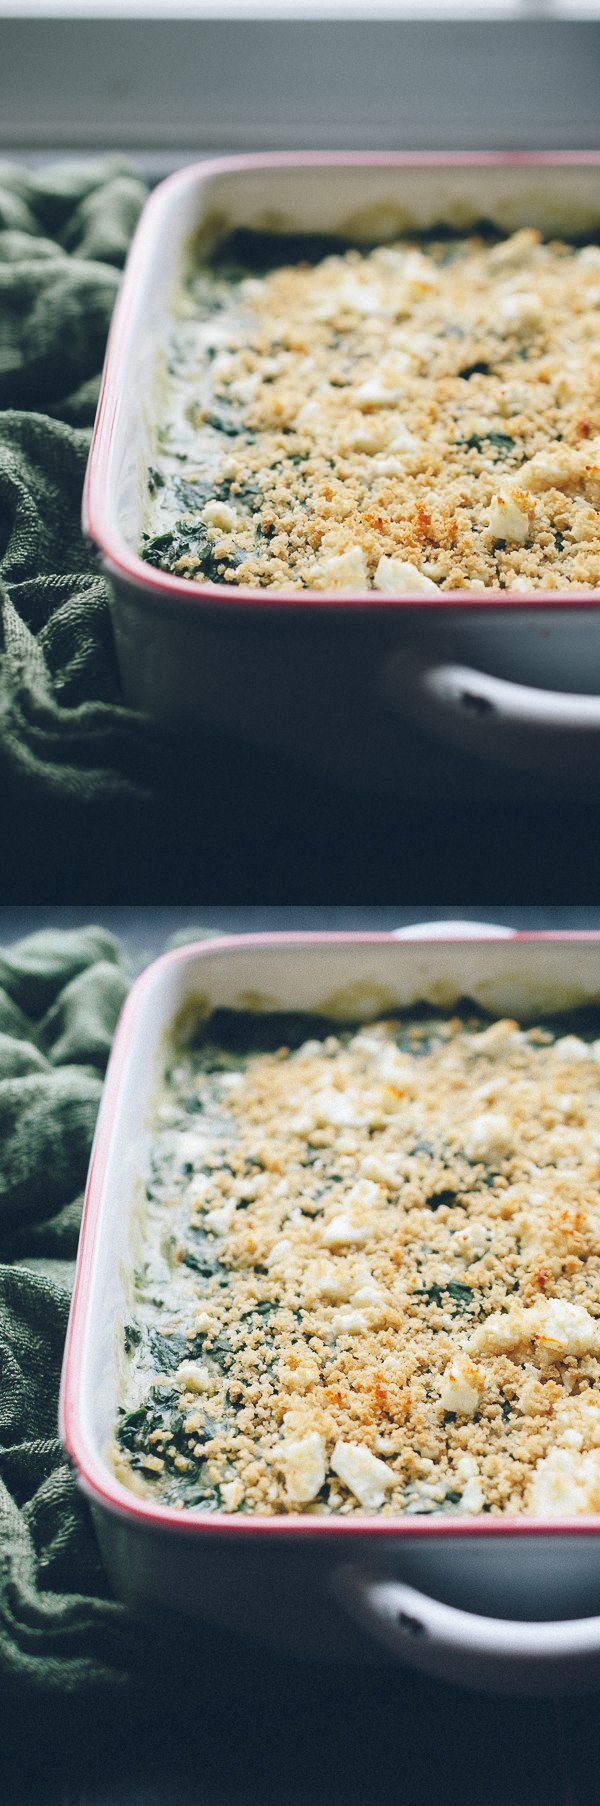 Baked Creamed Spinach with Feta